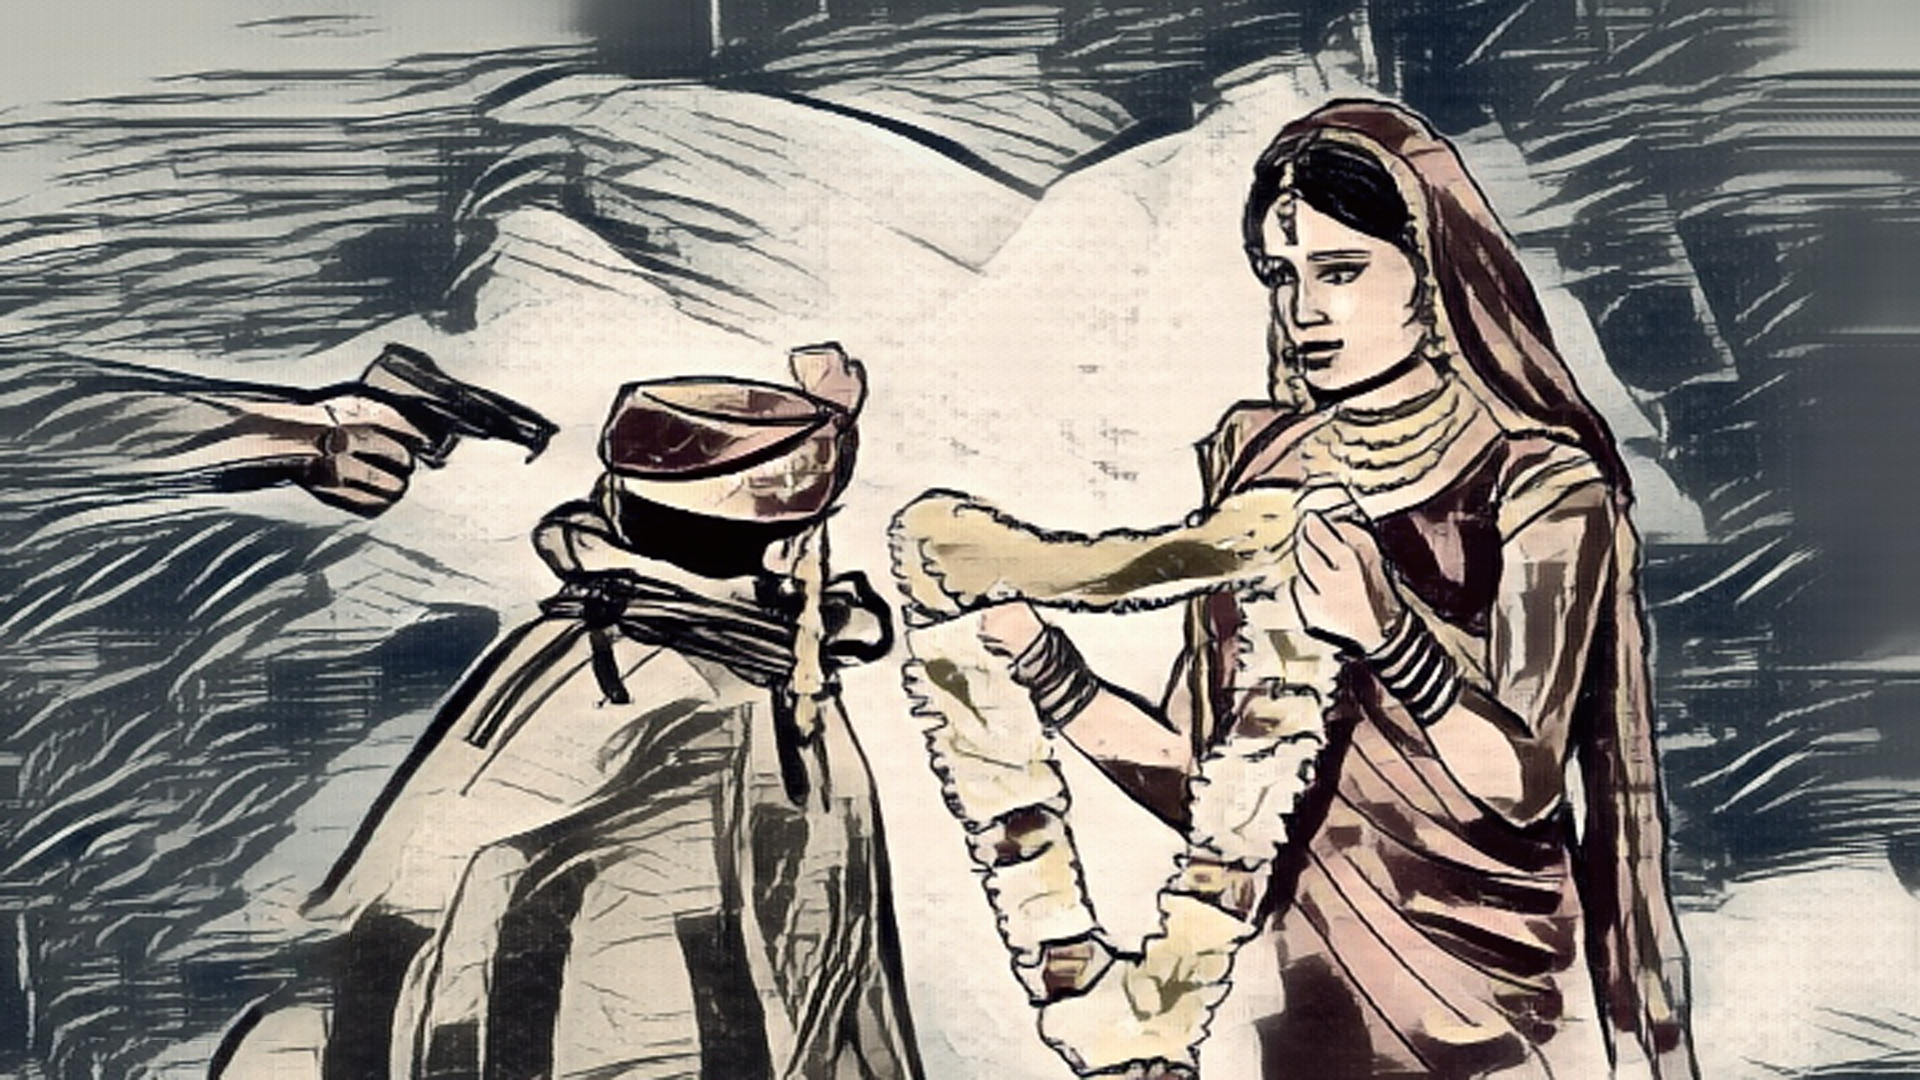 Getting Married at Gunpoint in Bihar